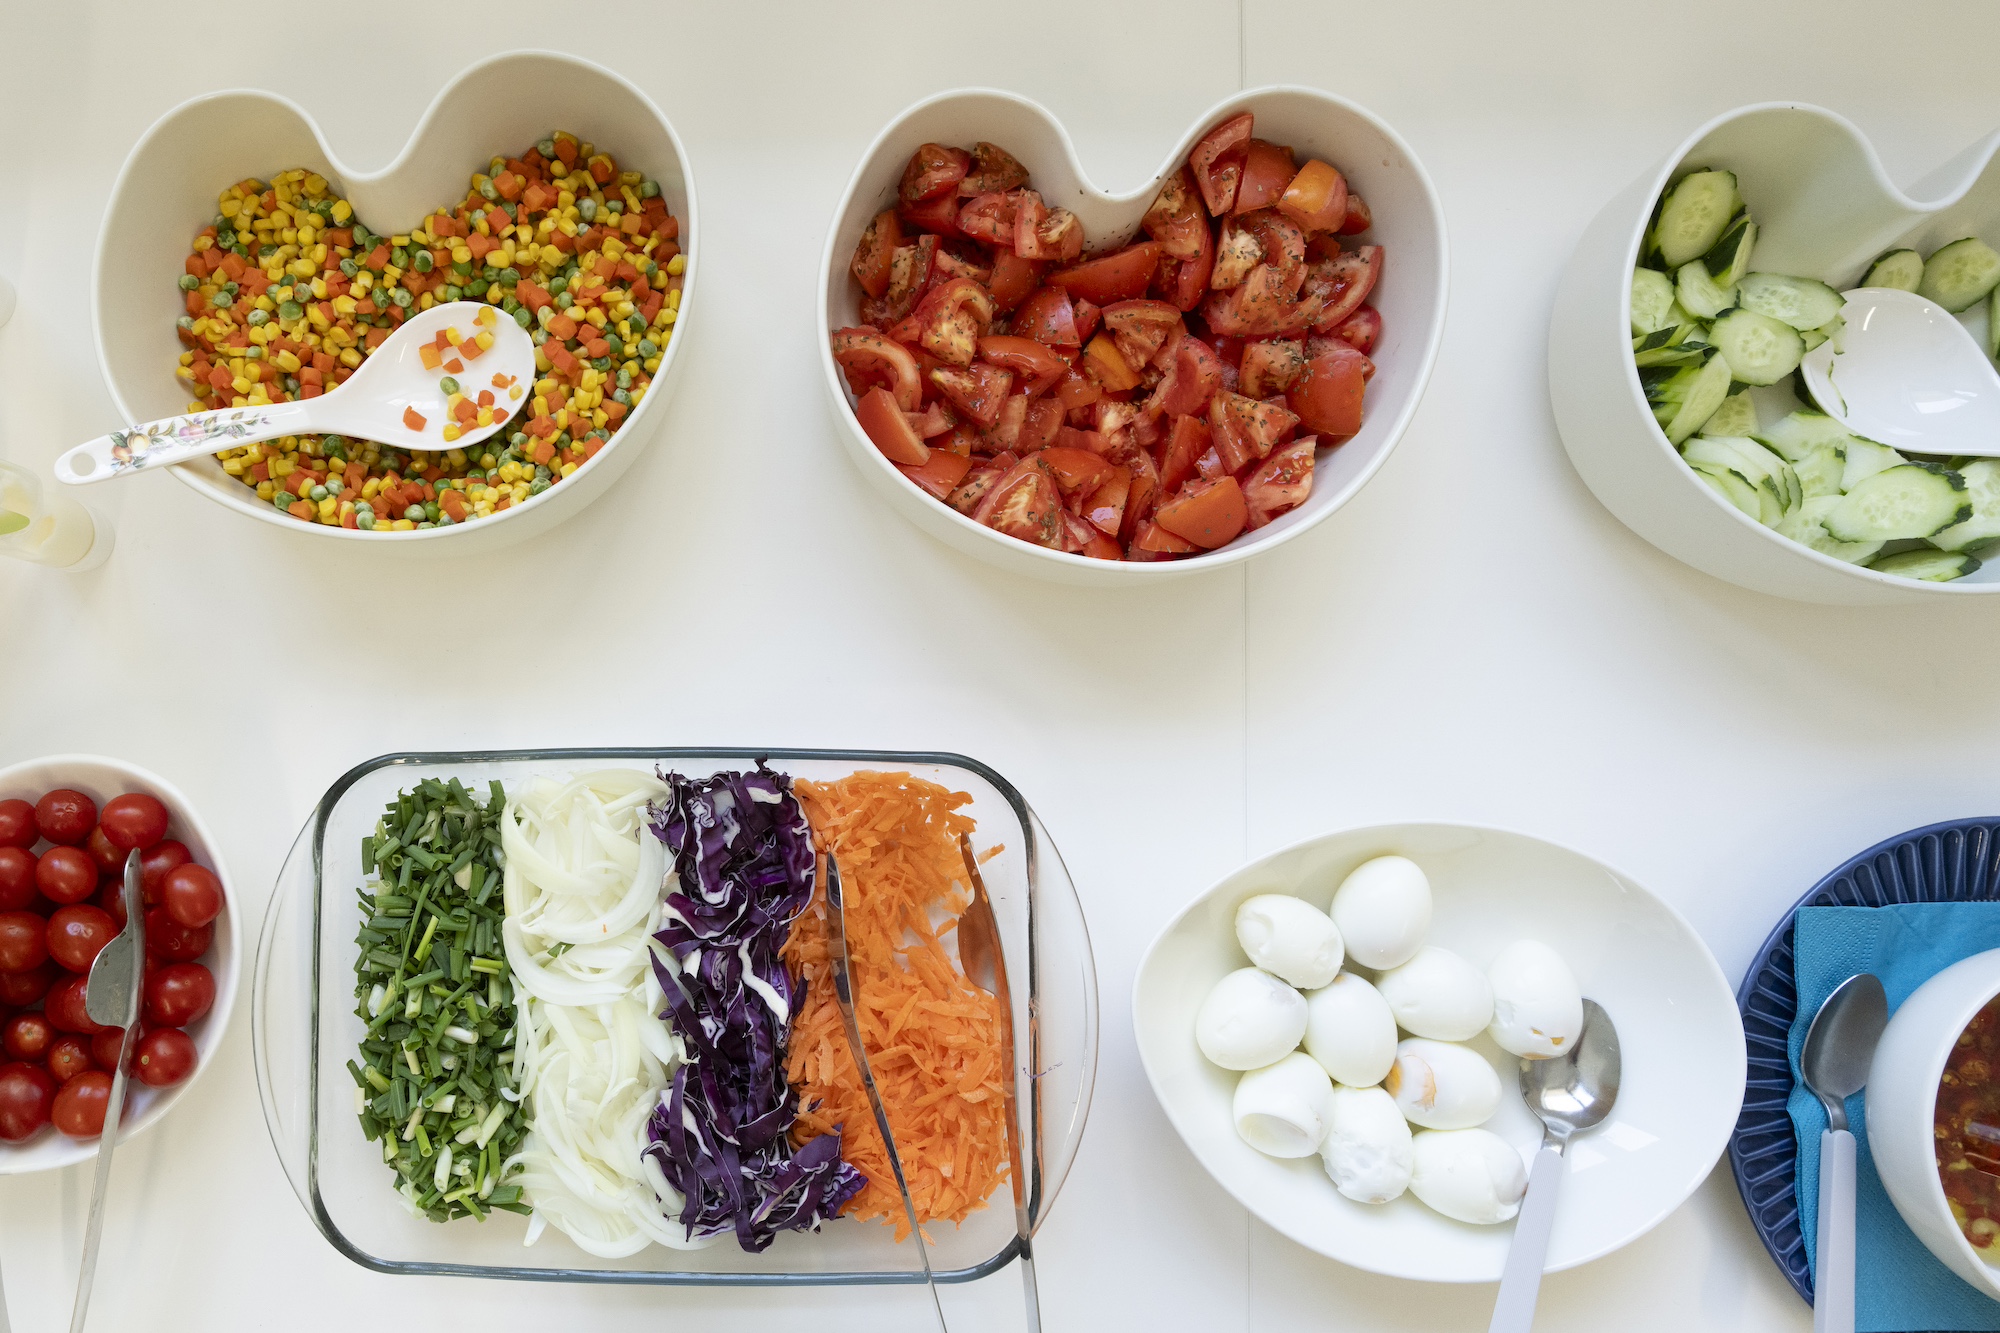 Freshly prepared meals curated by Portuguese dieticians help nourish young minds at Generations